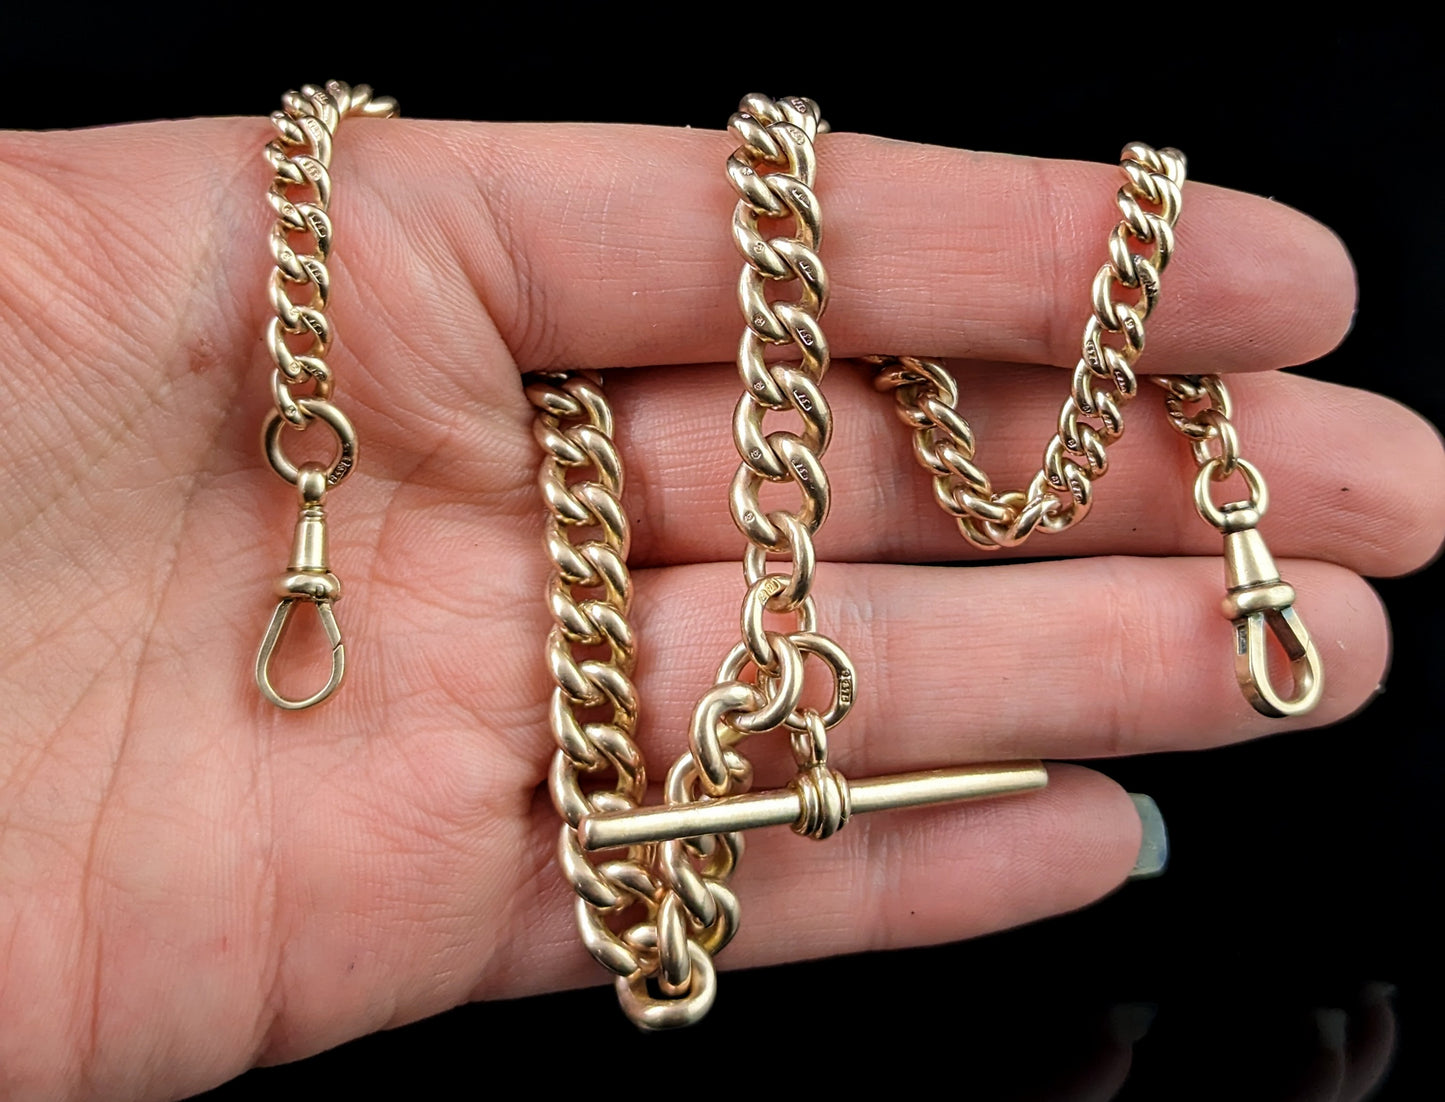 Antique 9ct gold double Albert chain, watch chain necklace, Heavy